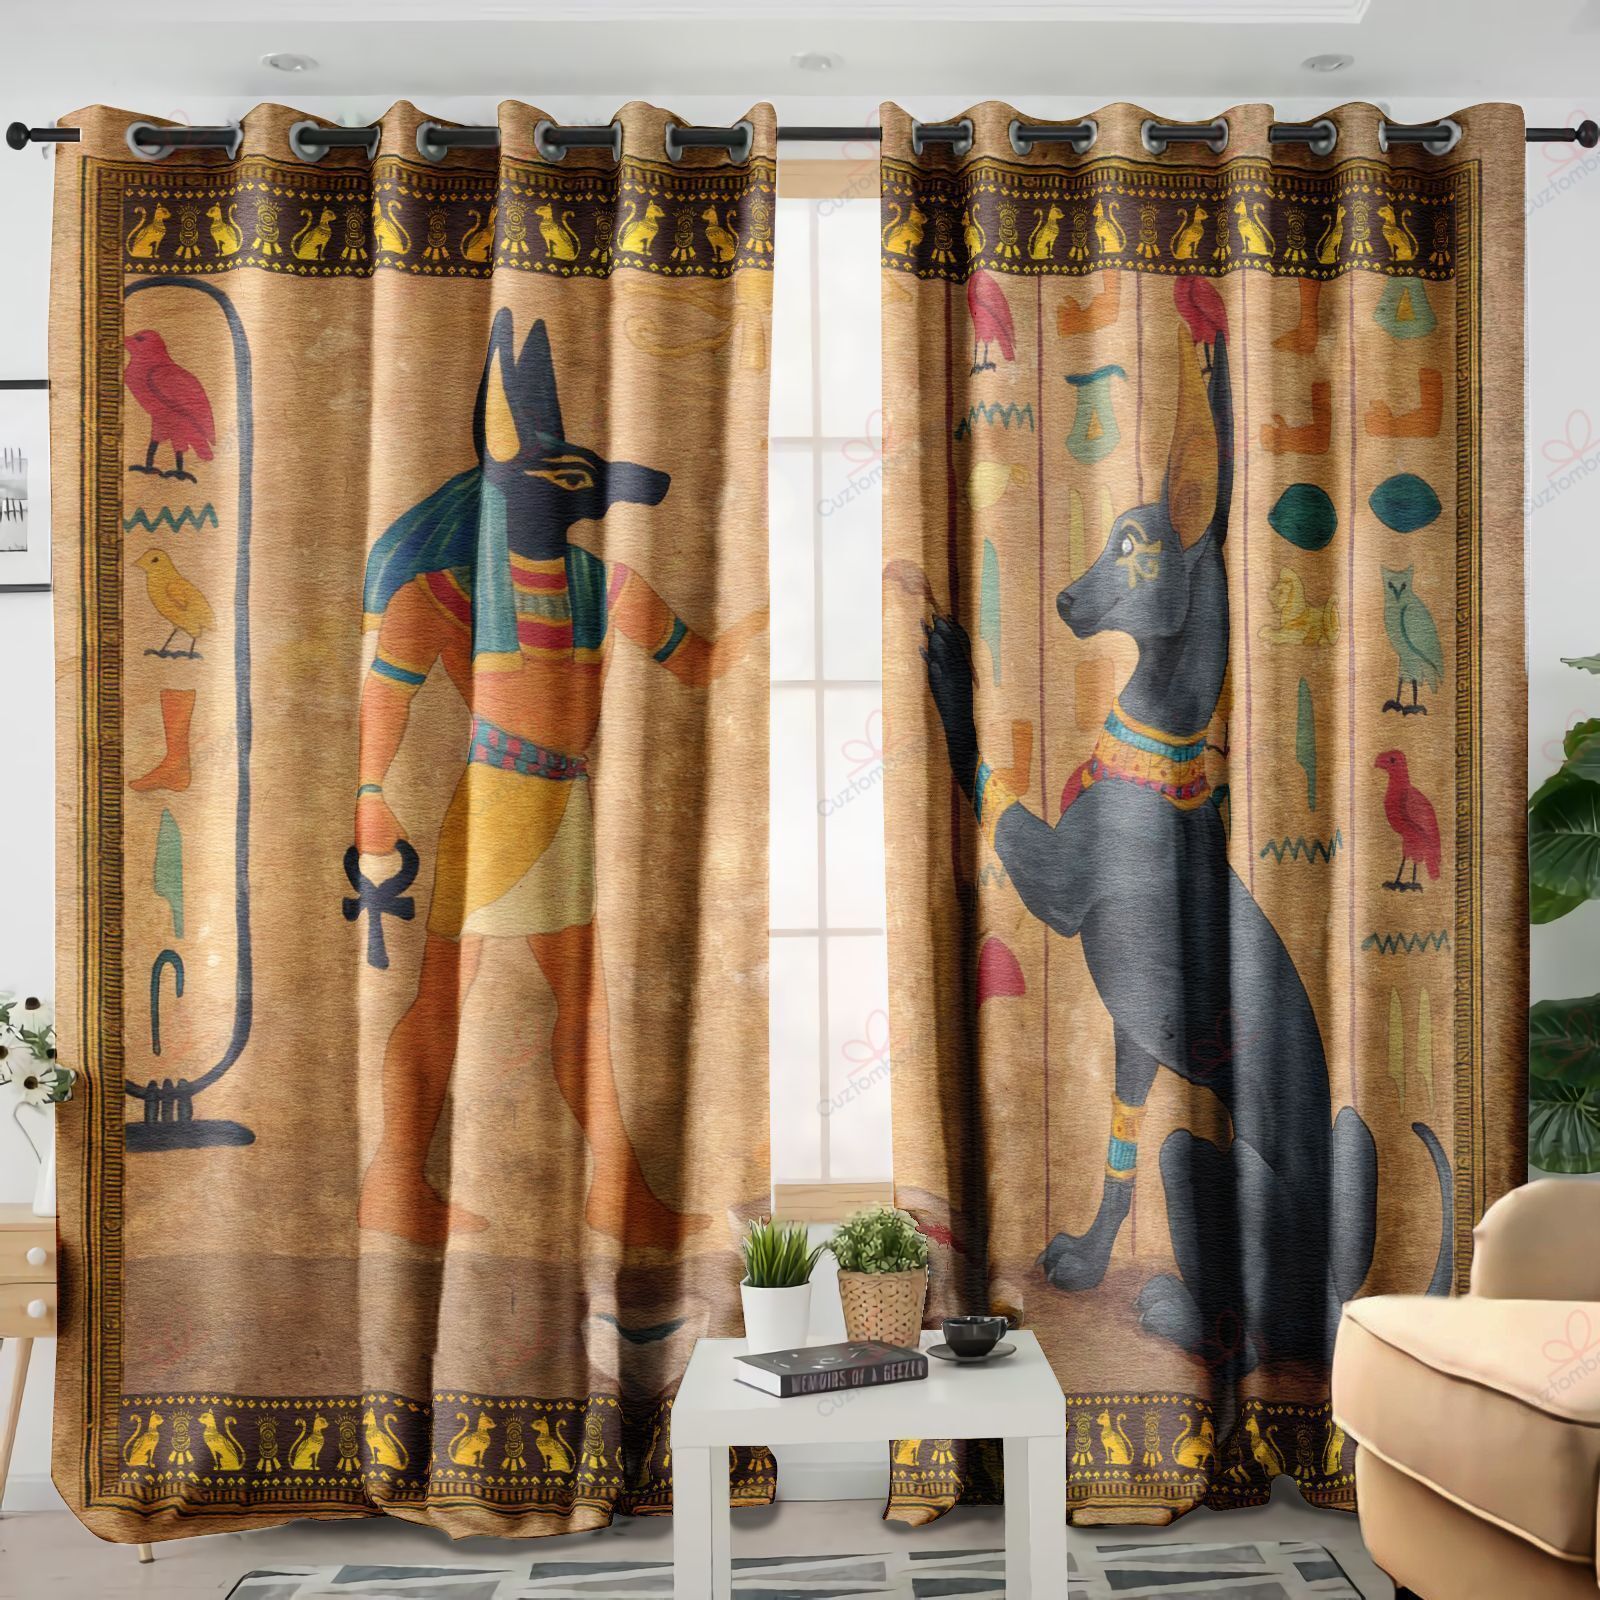 Egyptian Pattern Printed Window Curtains Home Decor